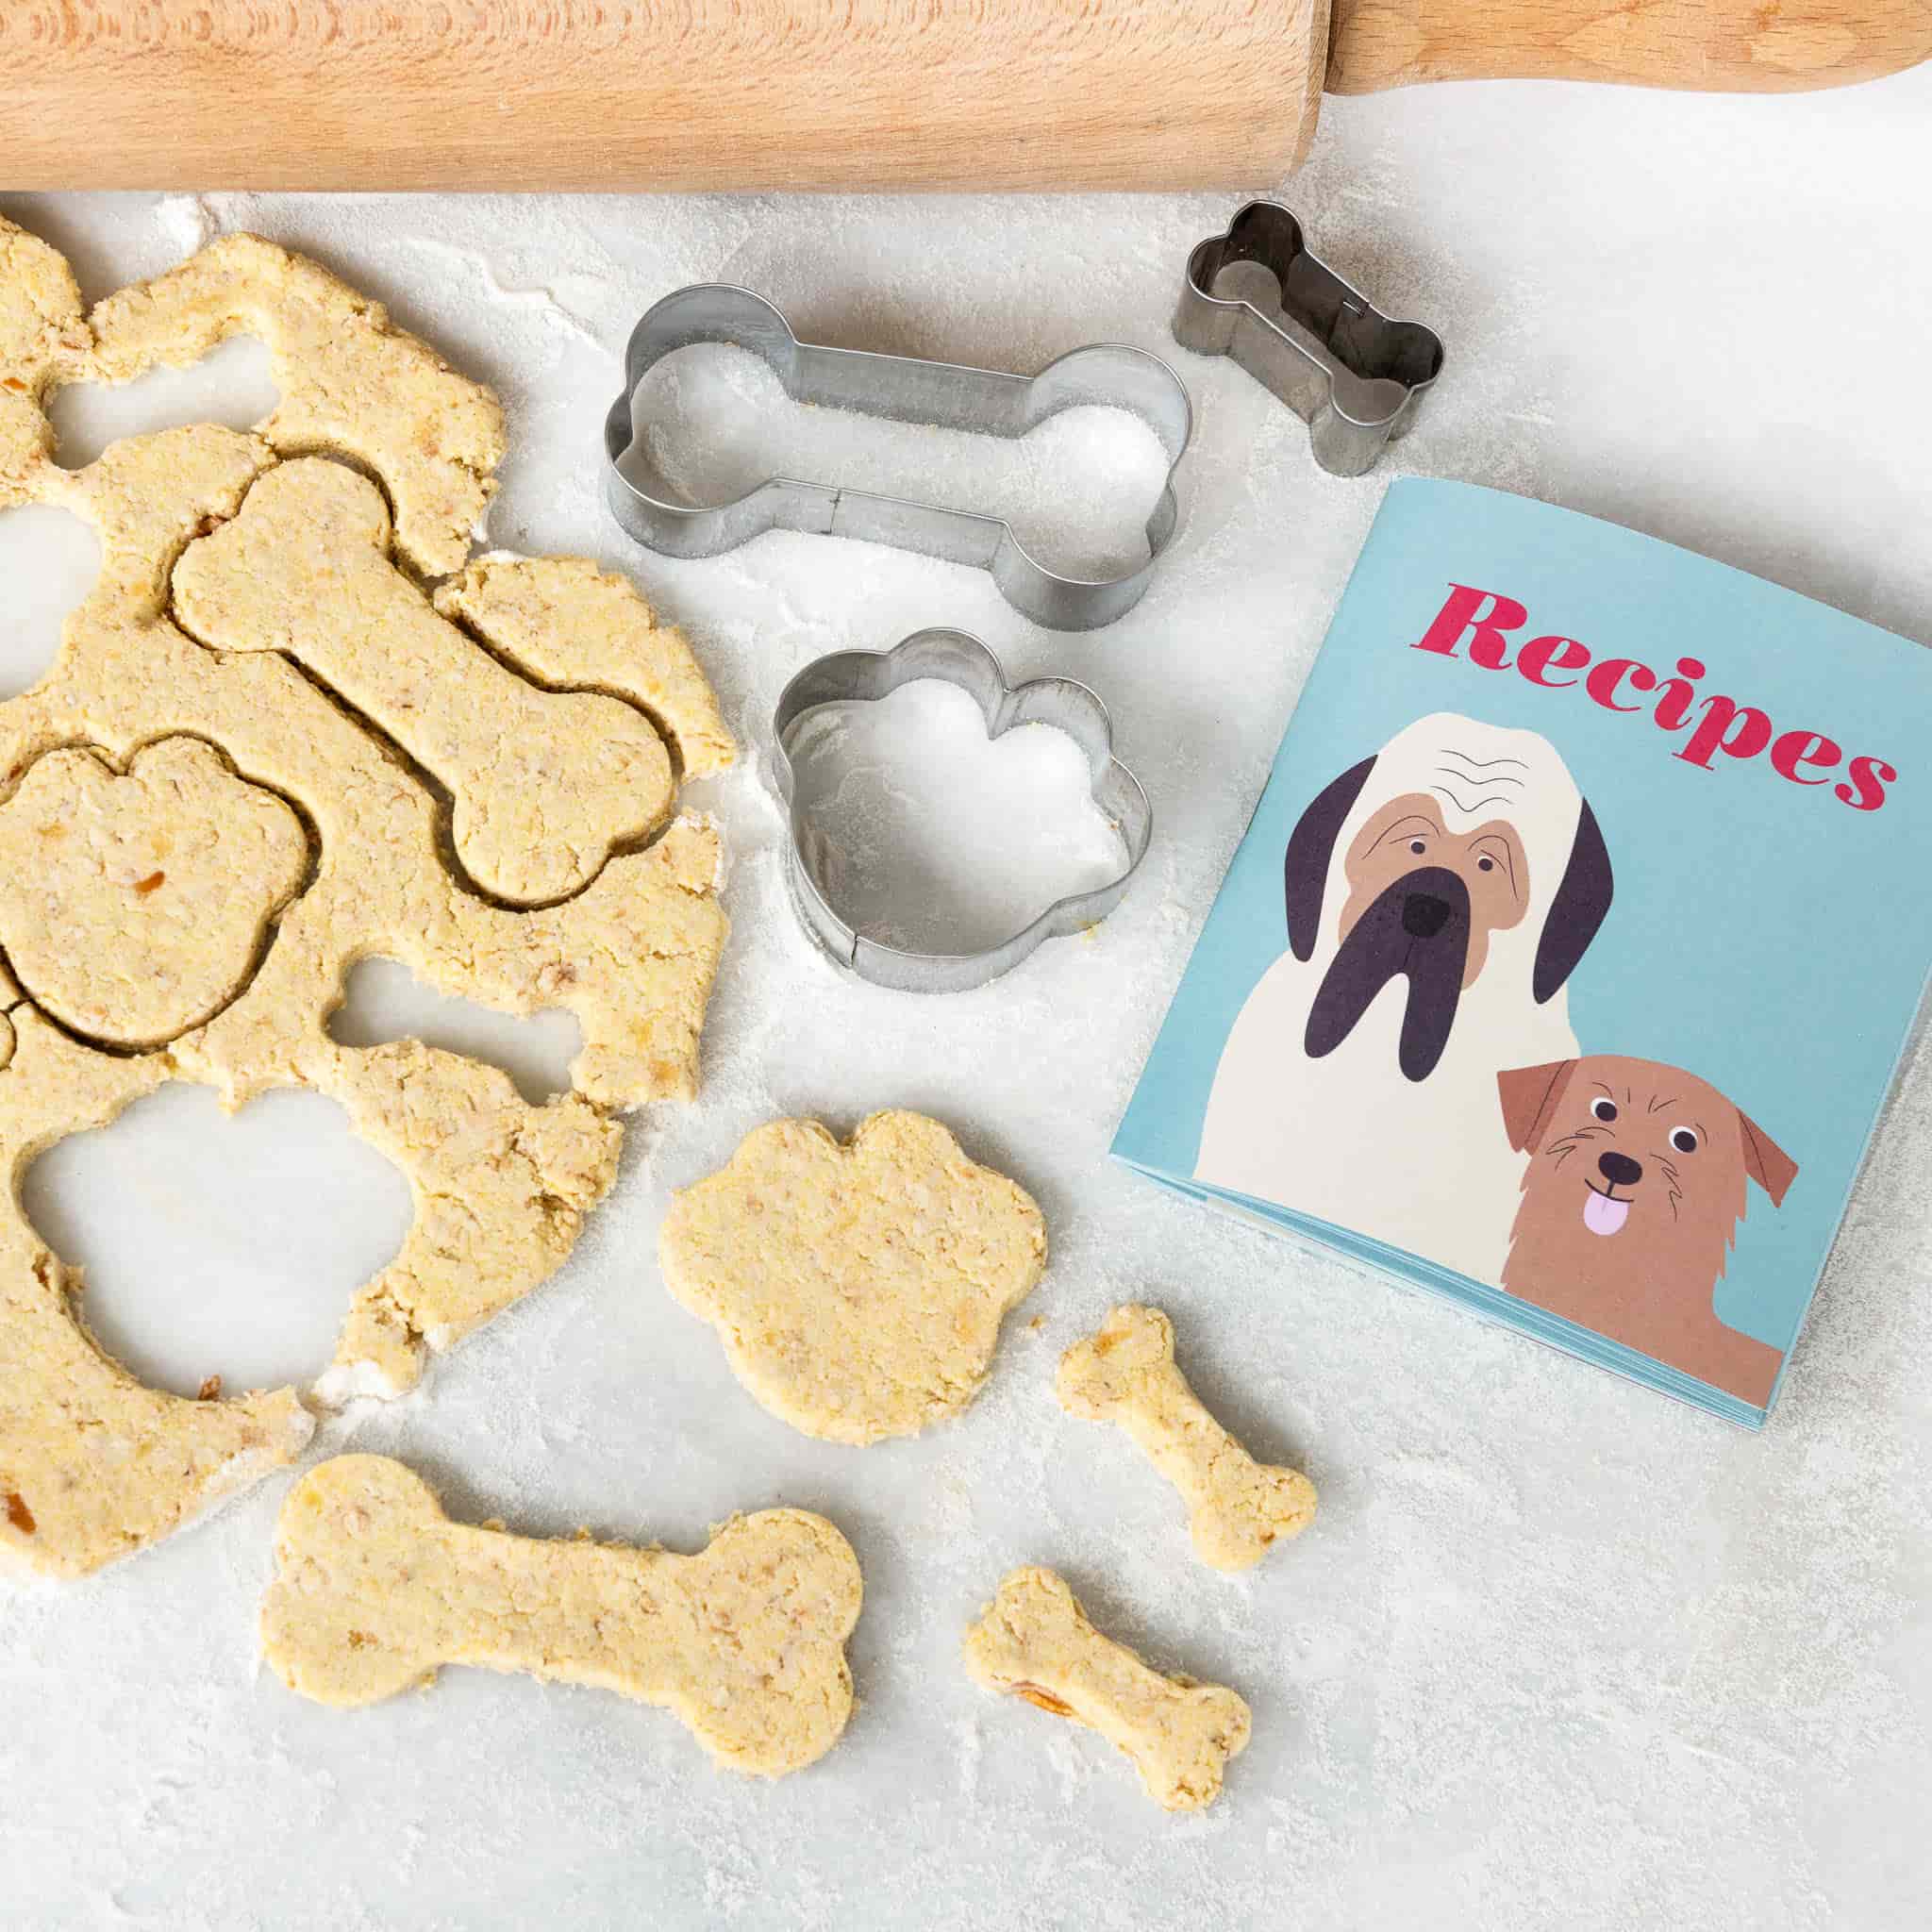 Make your Own Dog Biscuits Kit